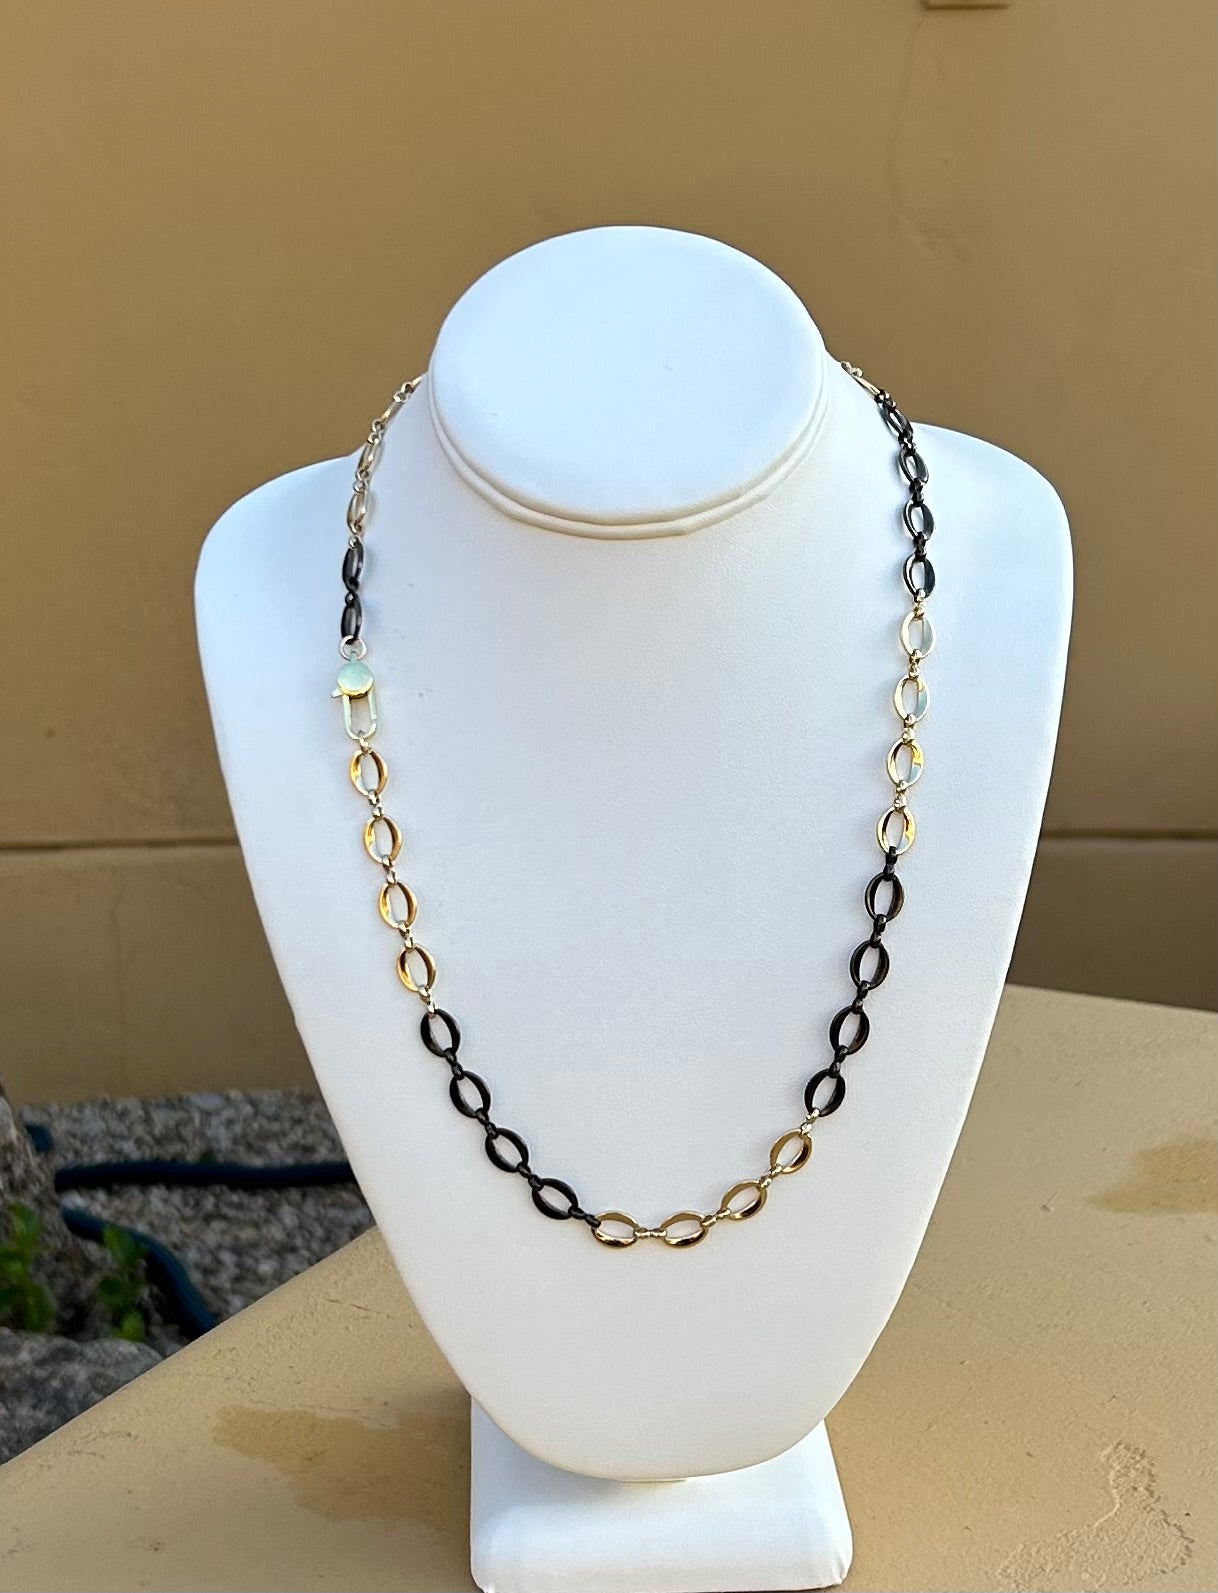 Necklace - Gold and black oval chain with a diaper pin clasp